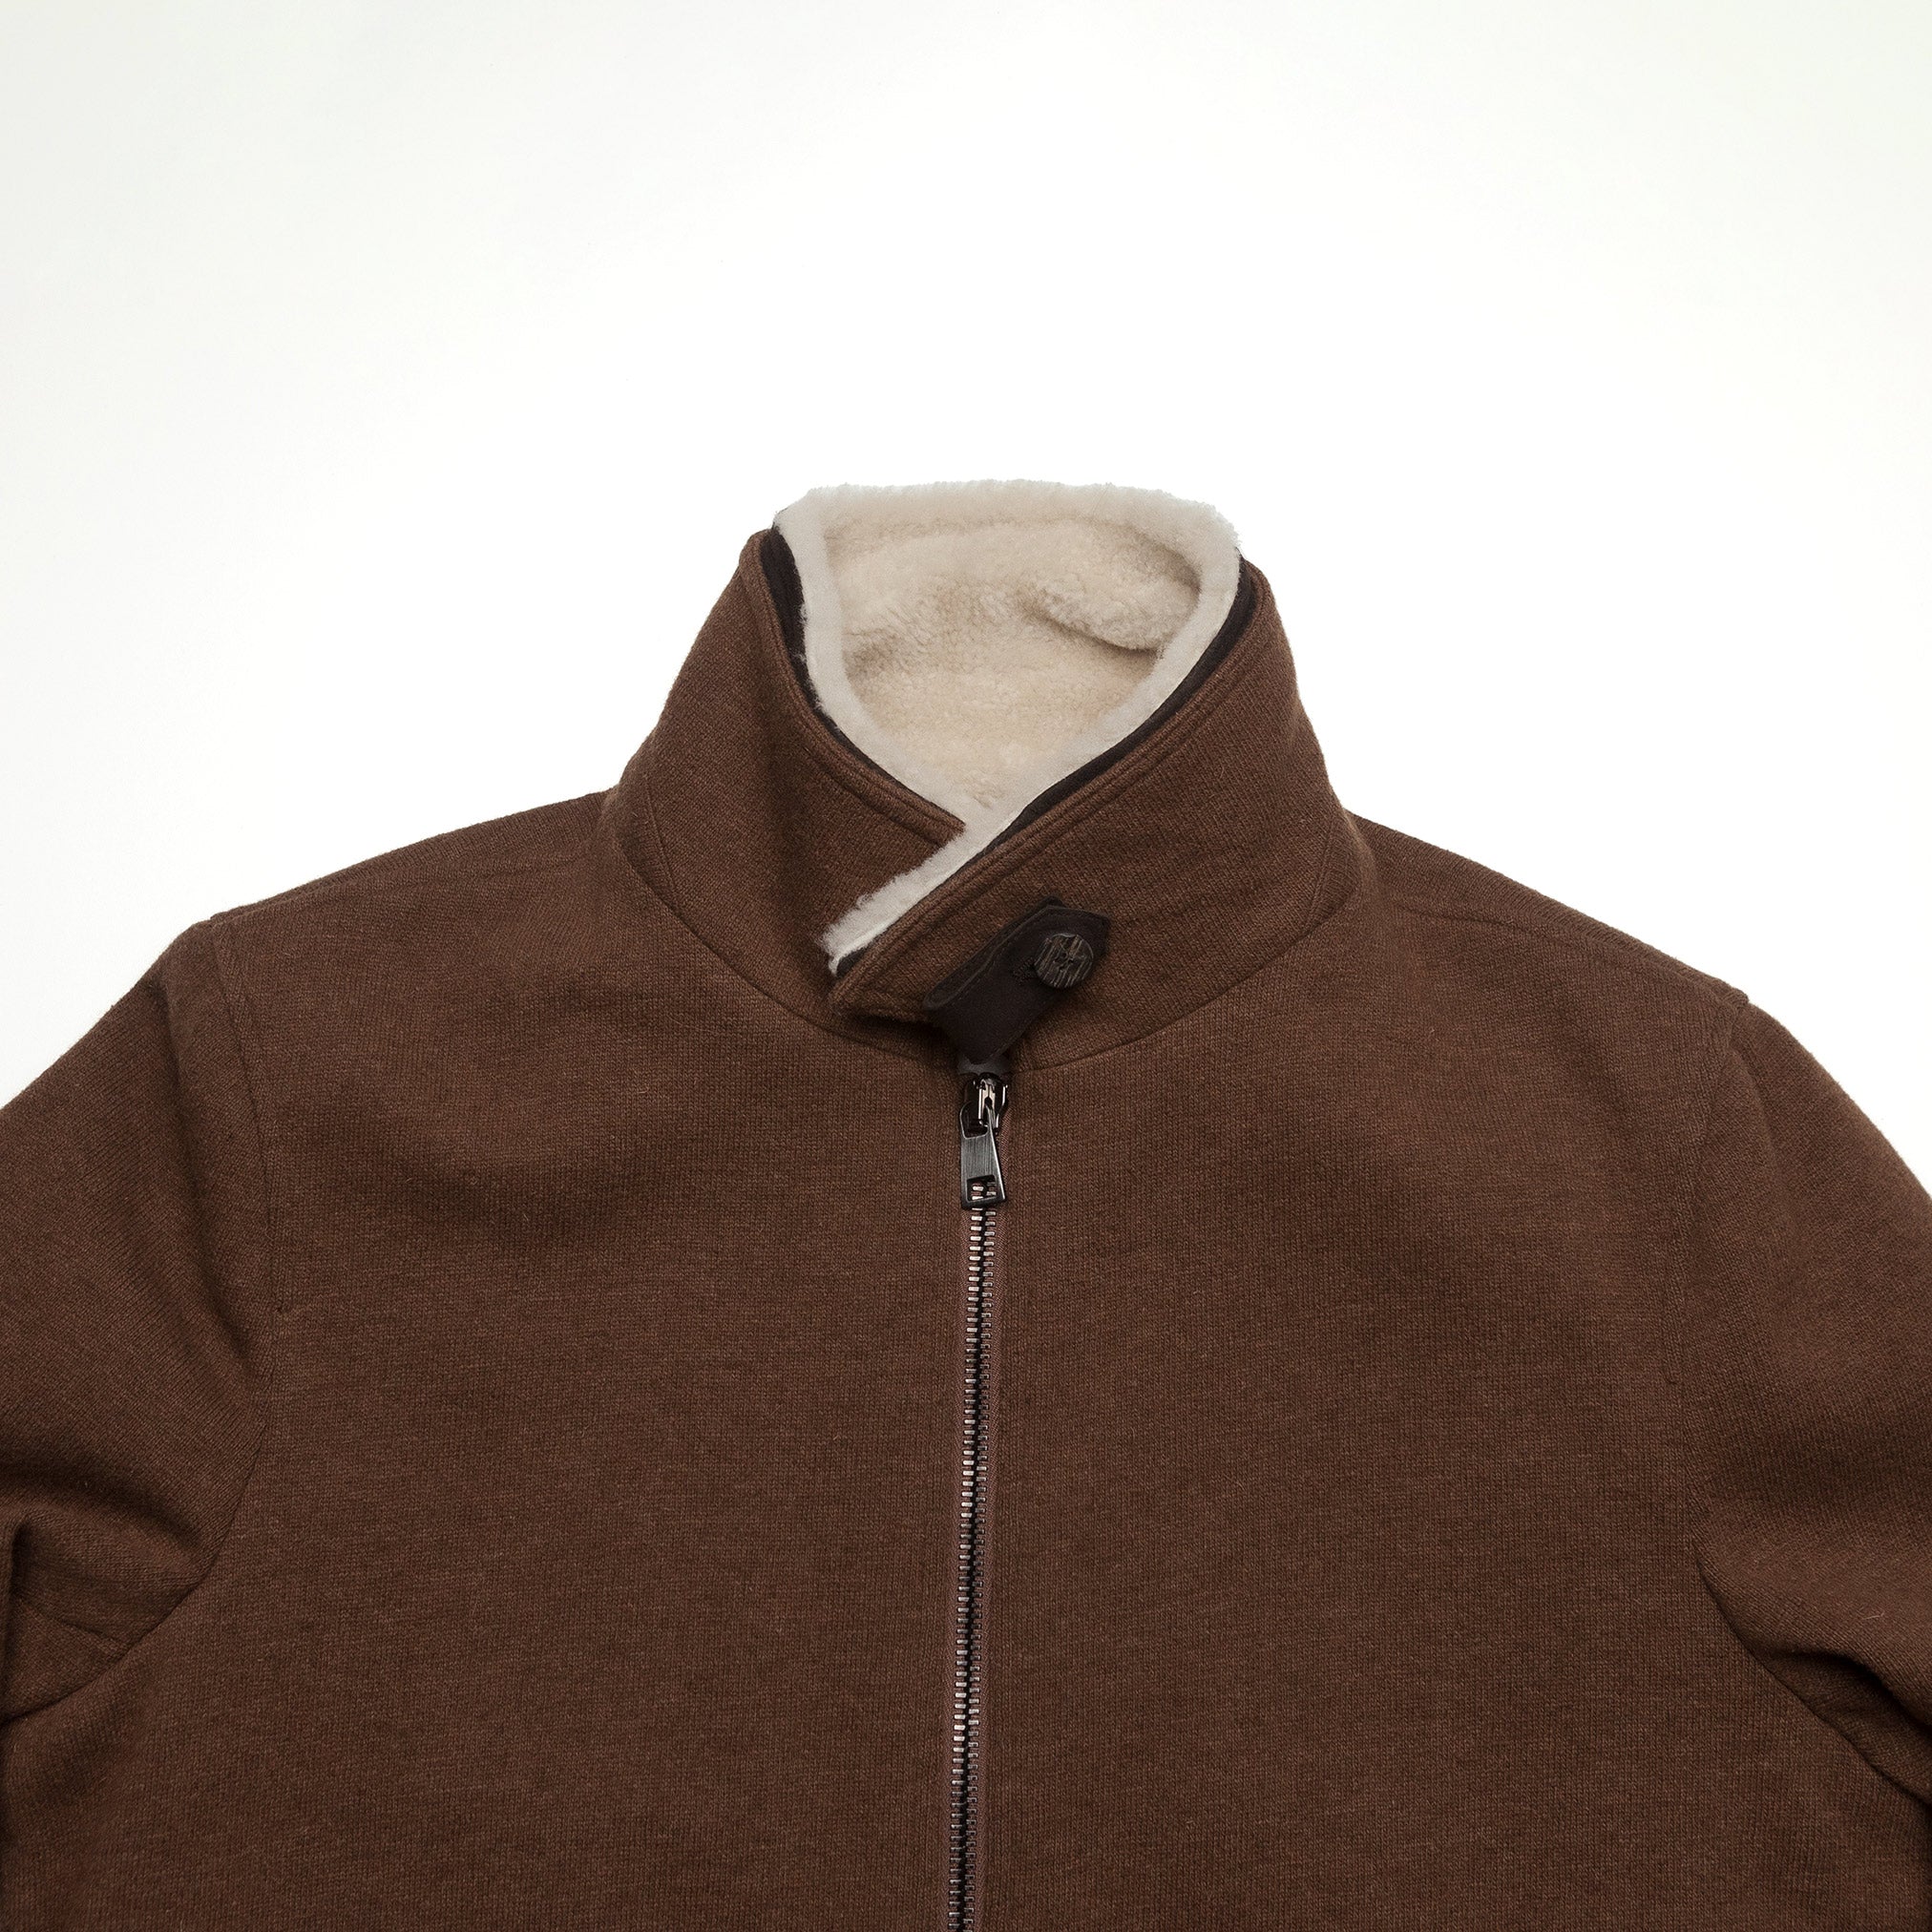 Lined Bomber in Coffee